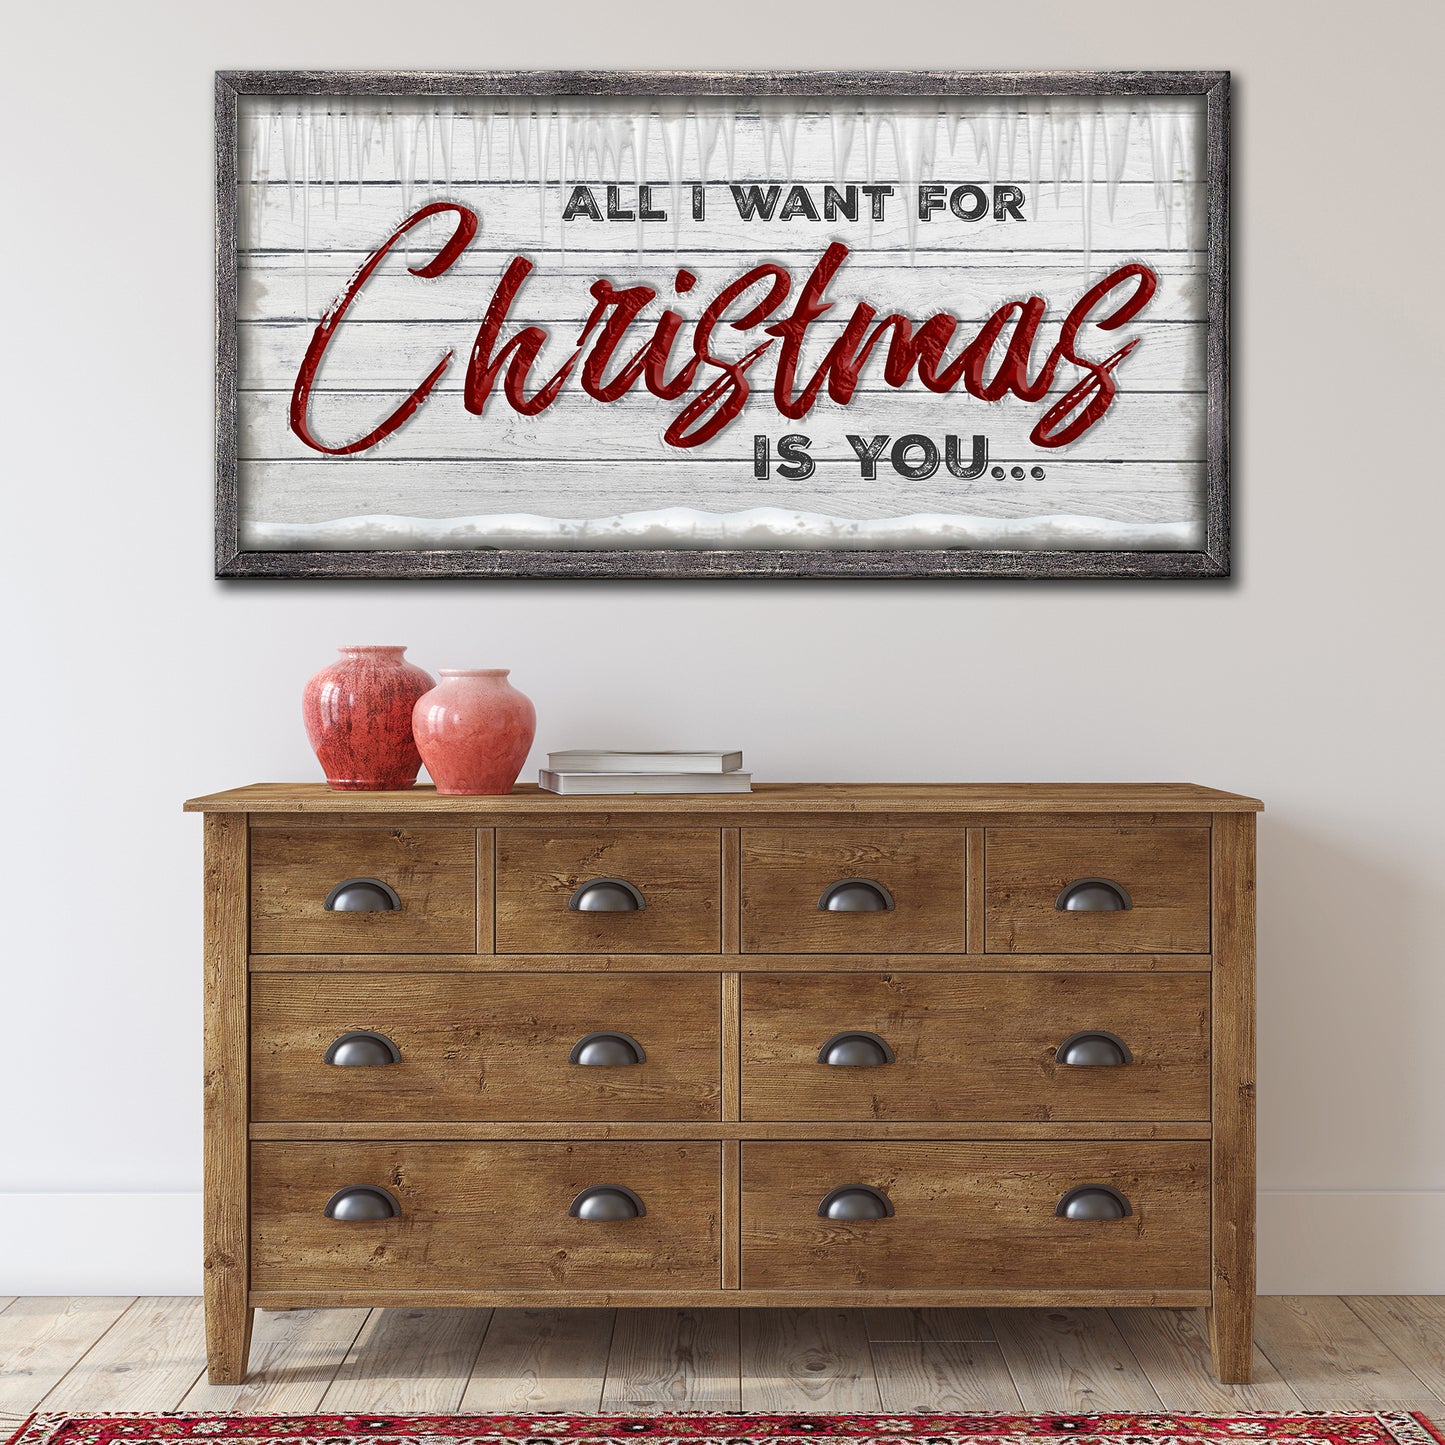 All I Want For Christmas Is You Sign - Image by Tailored Canvases